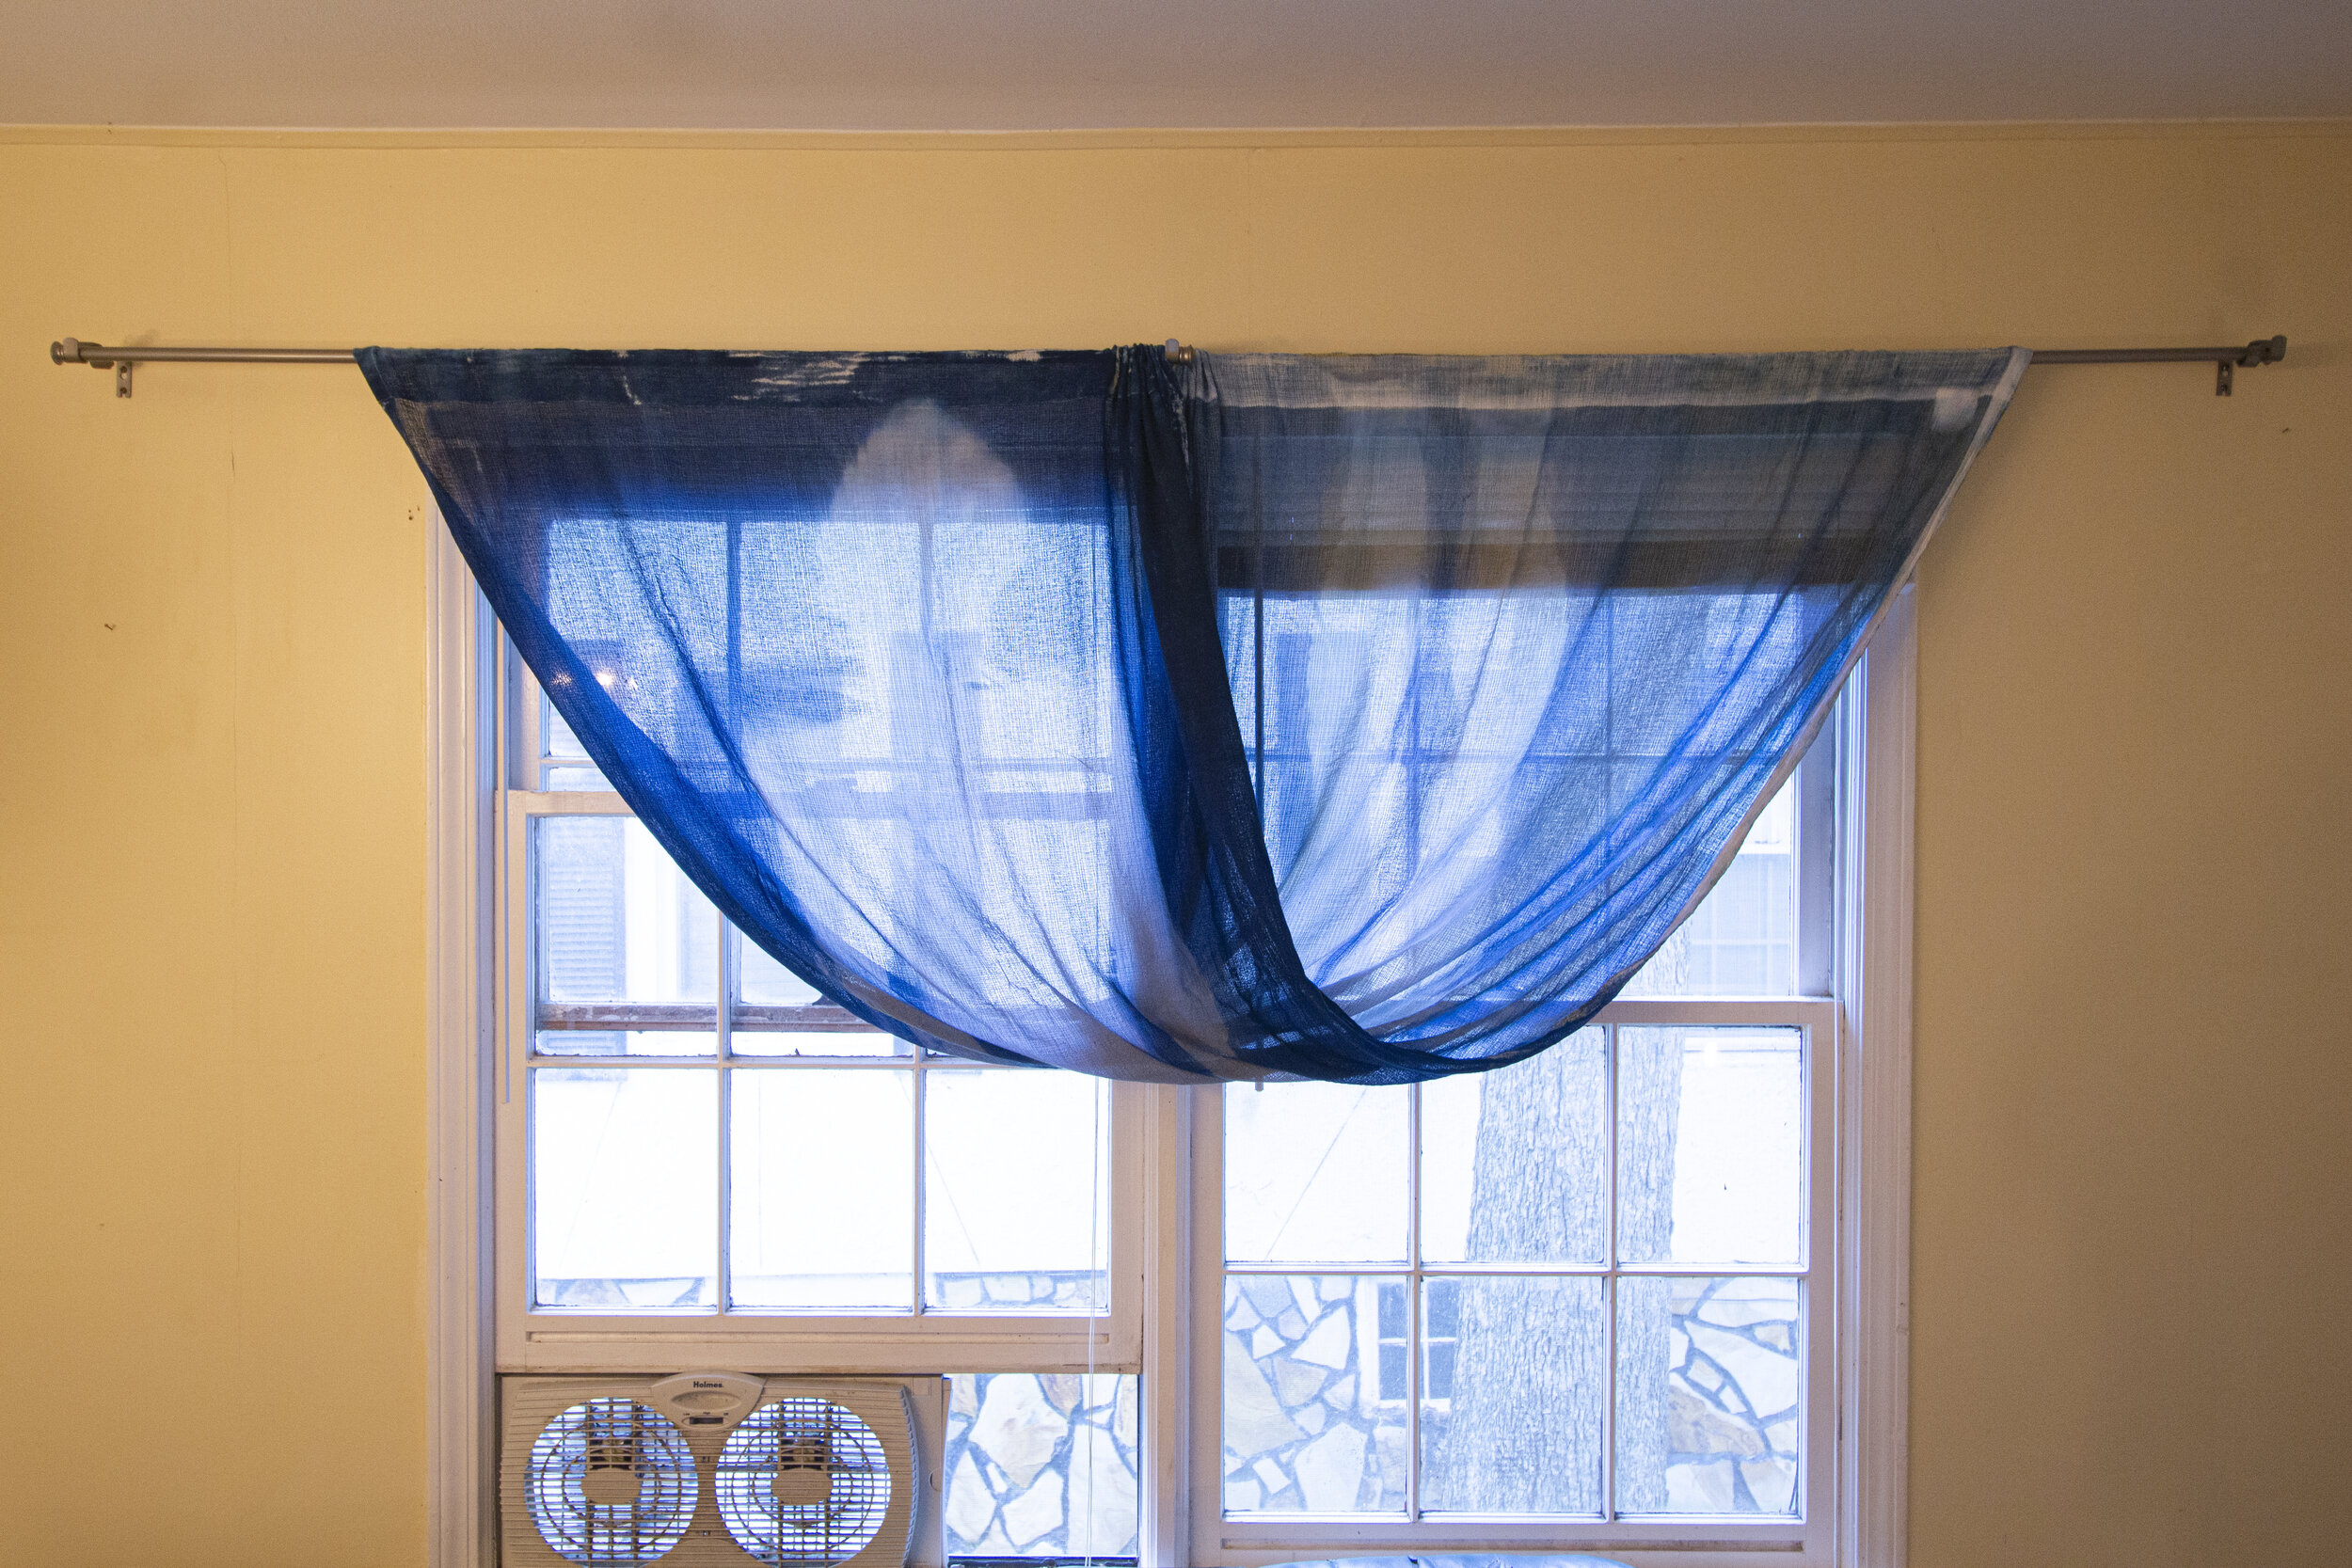 Half Twist [midafternoon], 2020, cotton curtain, cyanotype solution, curtain rod, and hardware, 110 x 42 inches